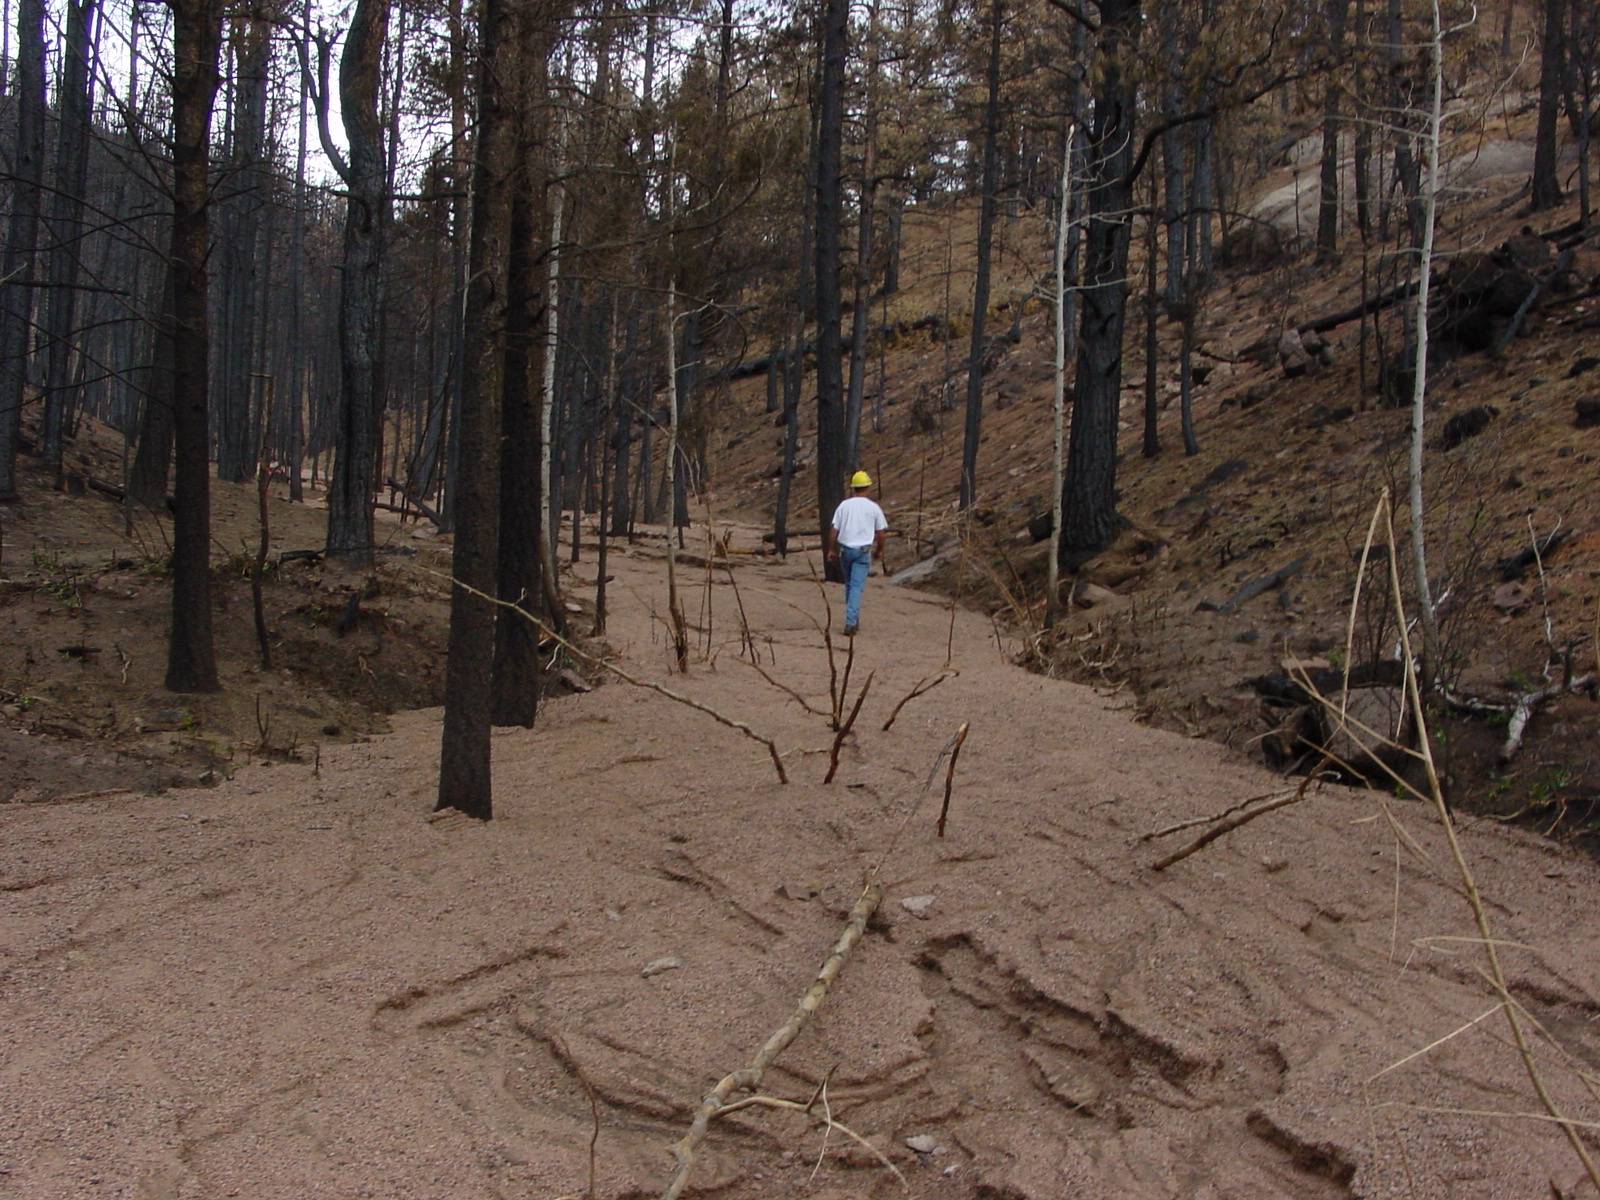 Large amounts of sediment end up in drainages around Cheesman Reservoir due to the Hayman Fire of 2002. Photo credit: Denver Water.